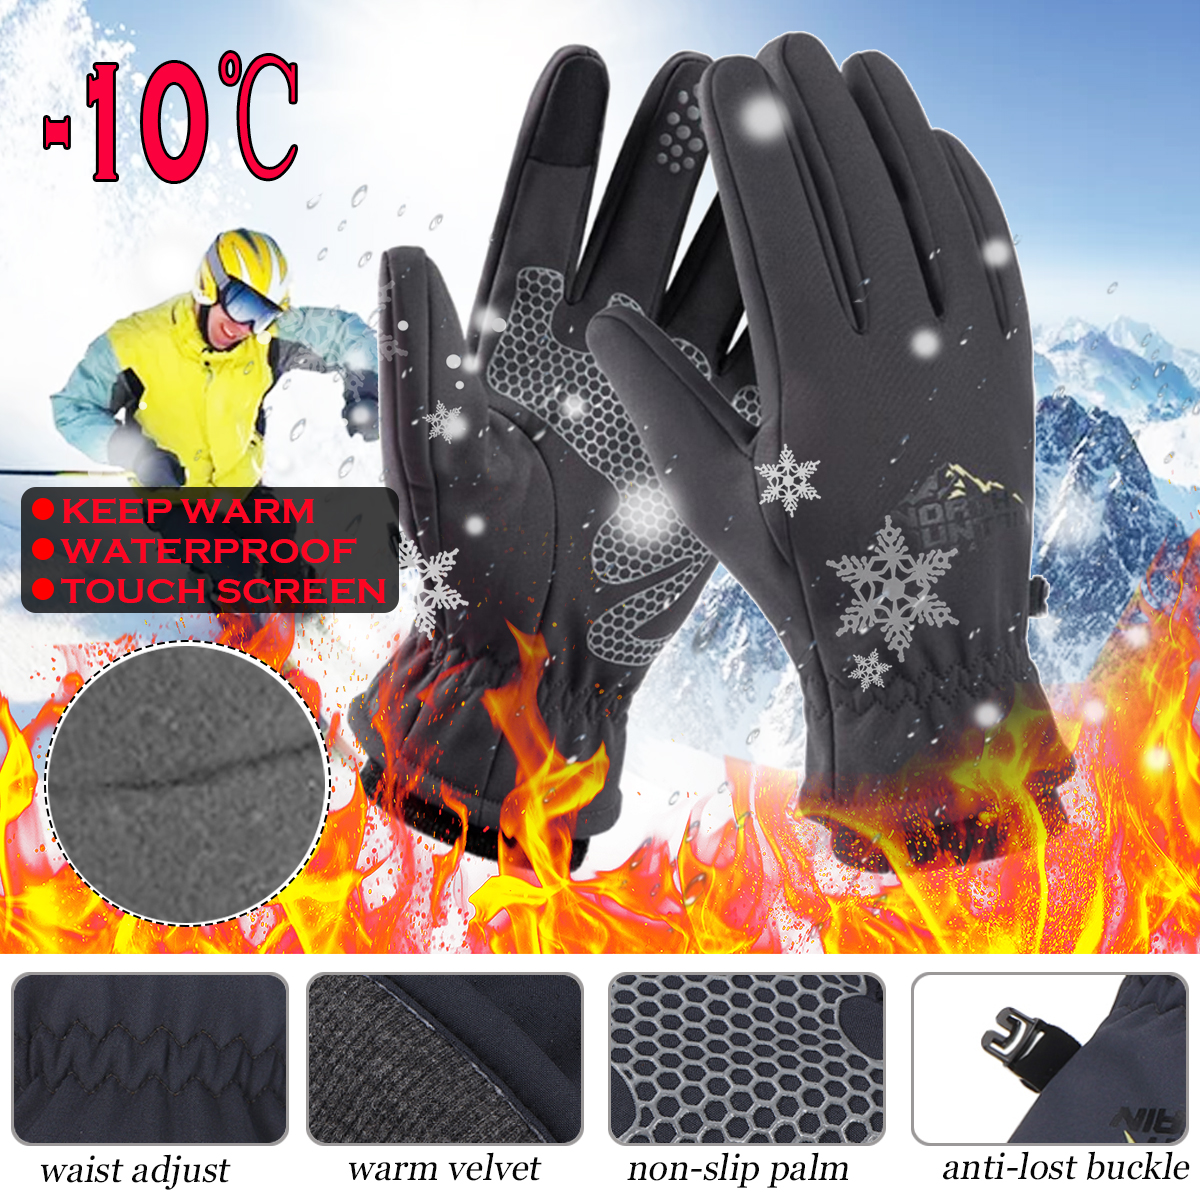 1Pair-899-Outdoor-Non-slip-Windproof-Warm-Thermal-Gloves-Ski-Snow-Cycling-Waterproof-Winter-Glove-1629275-2